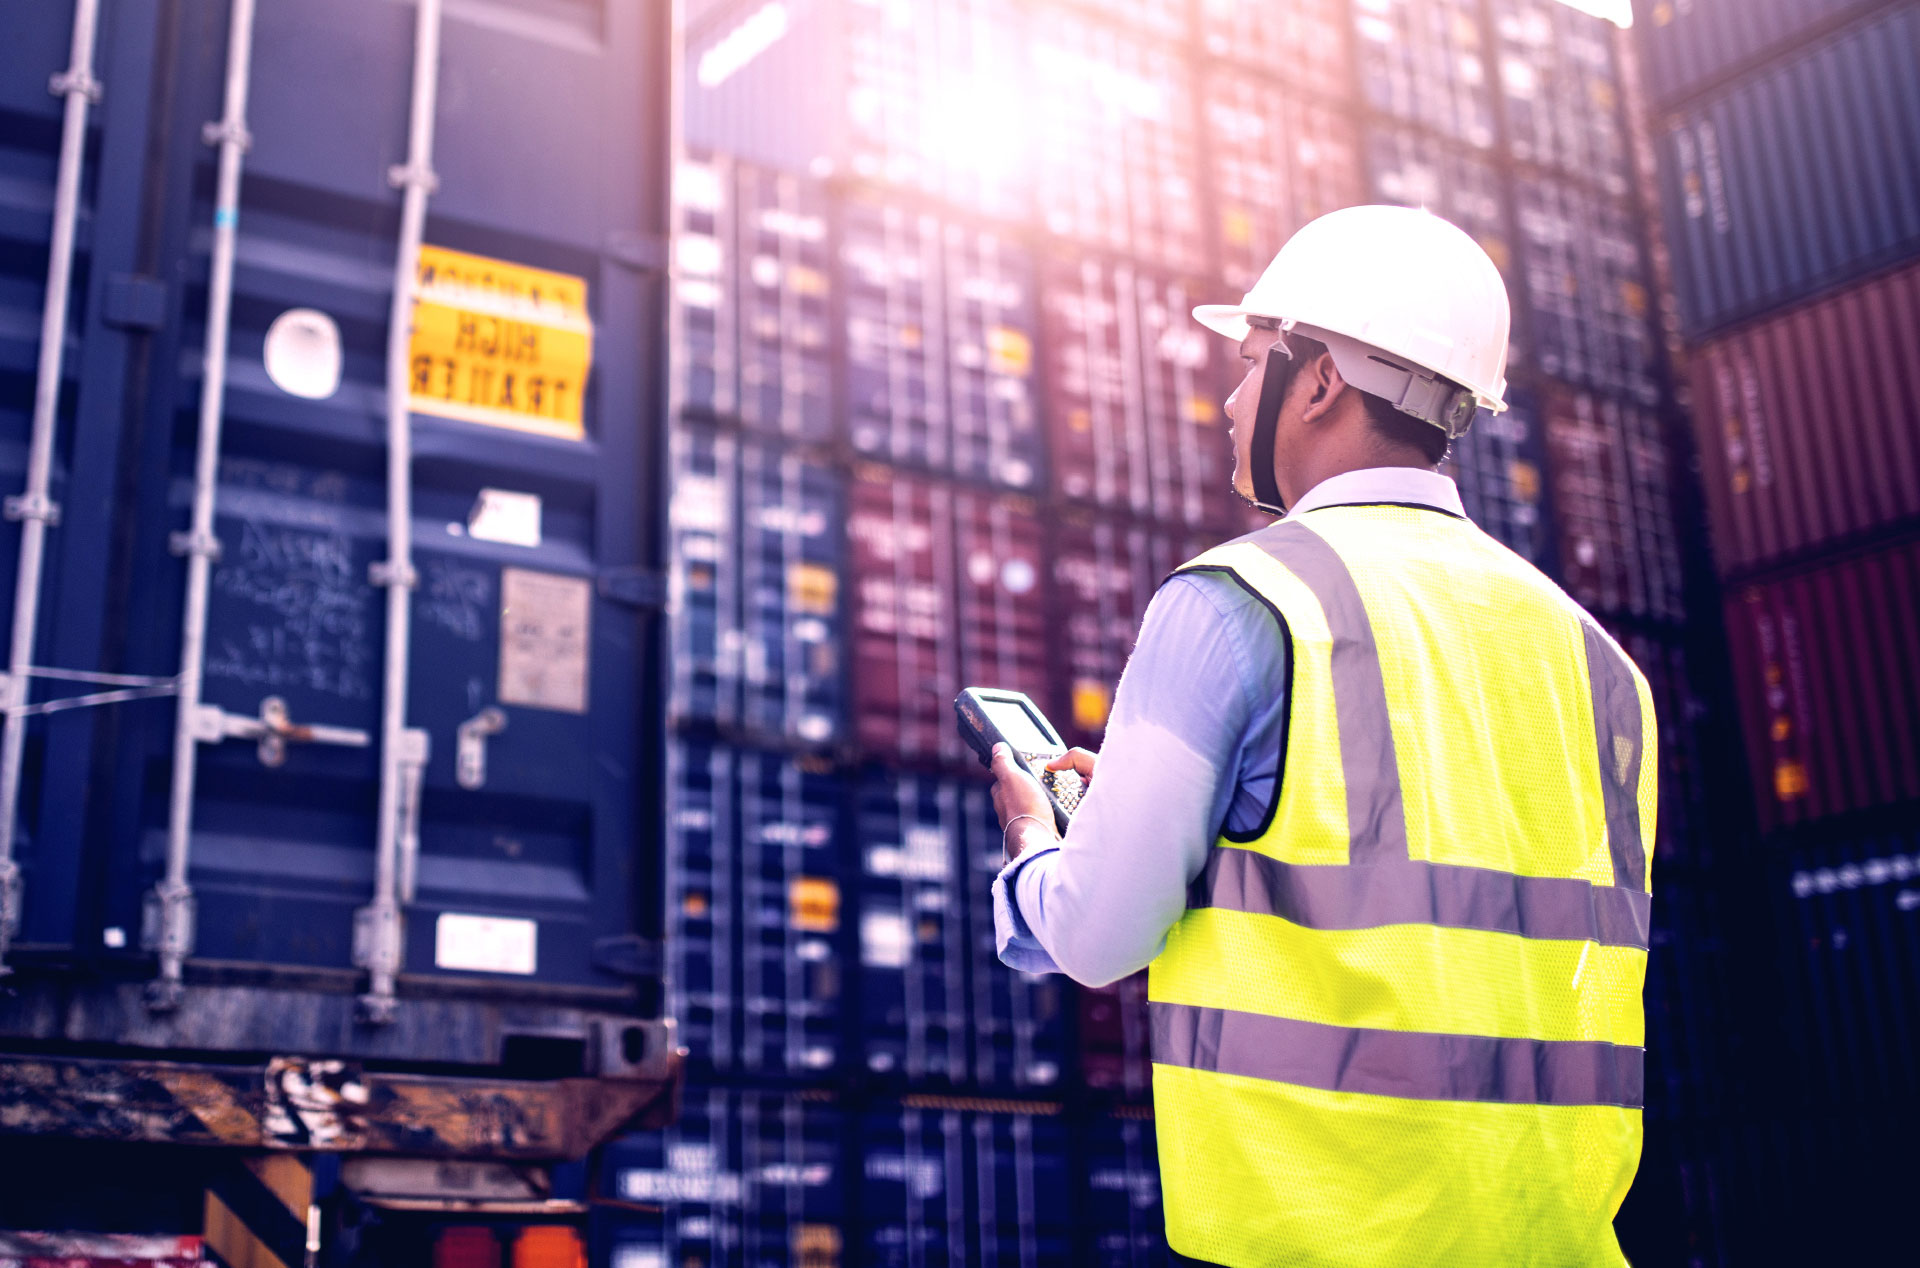 Man wearing a hard hat and working in large warehouse full of freight containers